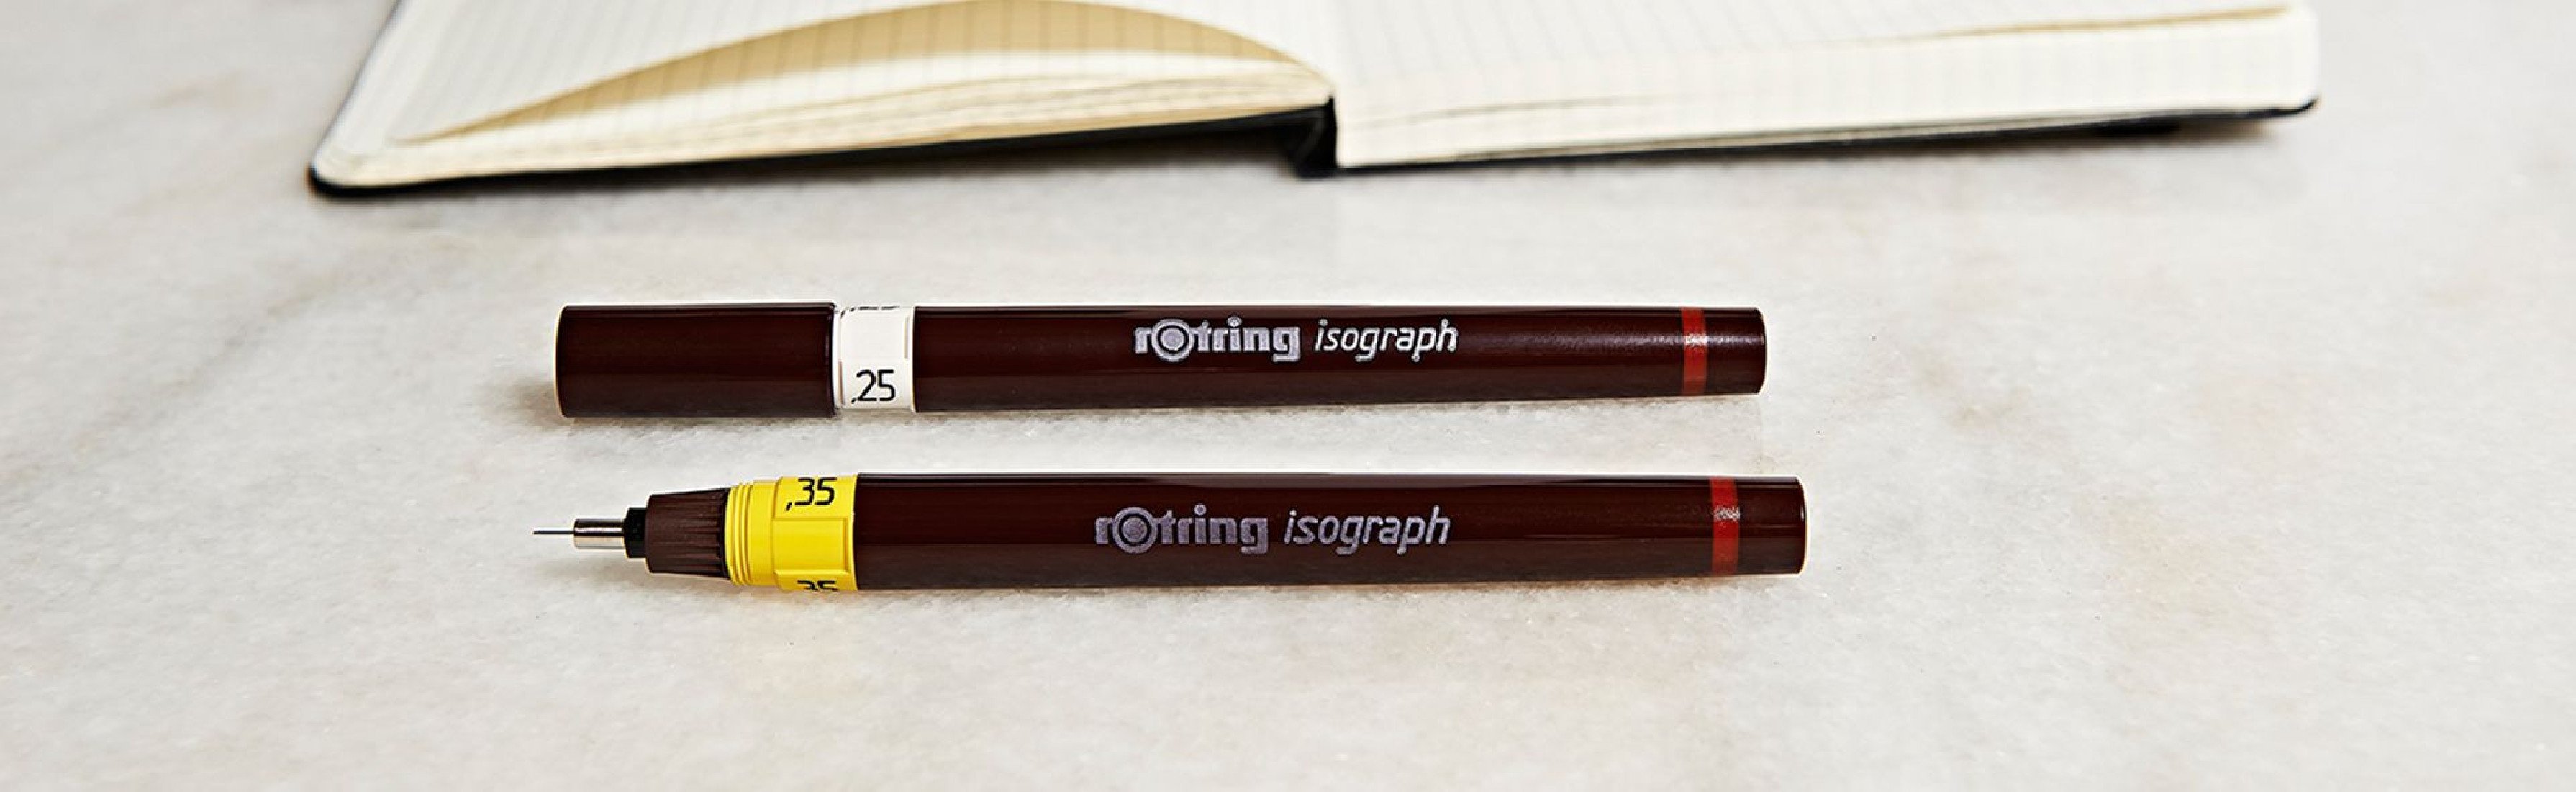 Rotring Isograph pen 0,1mm